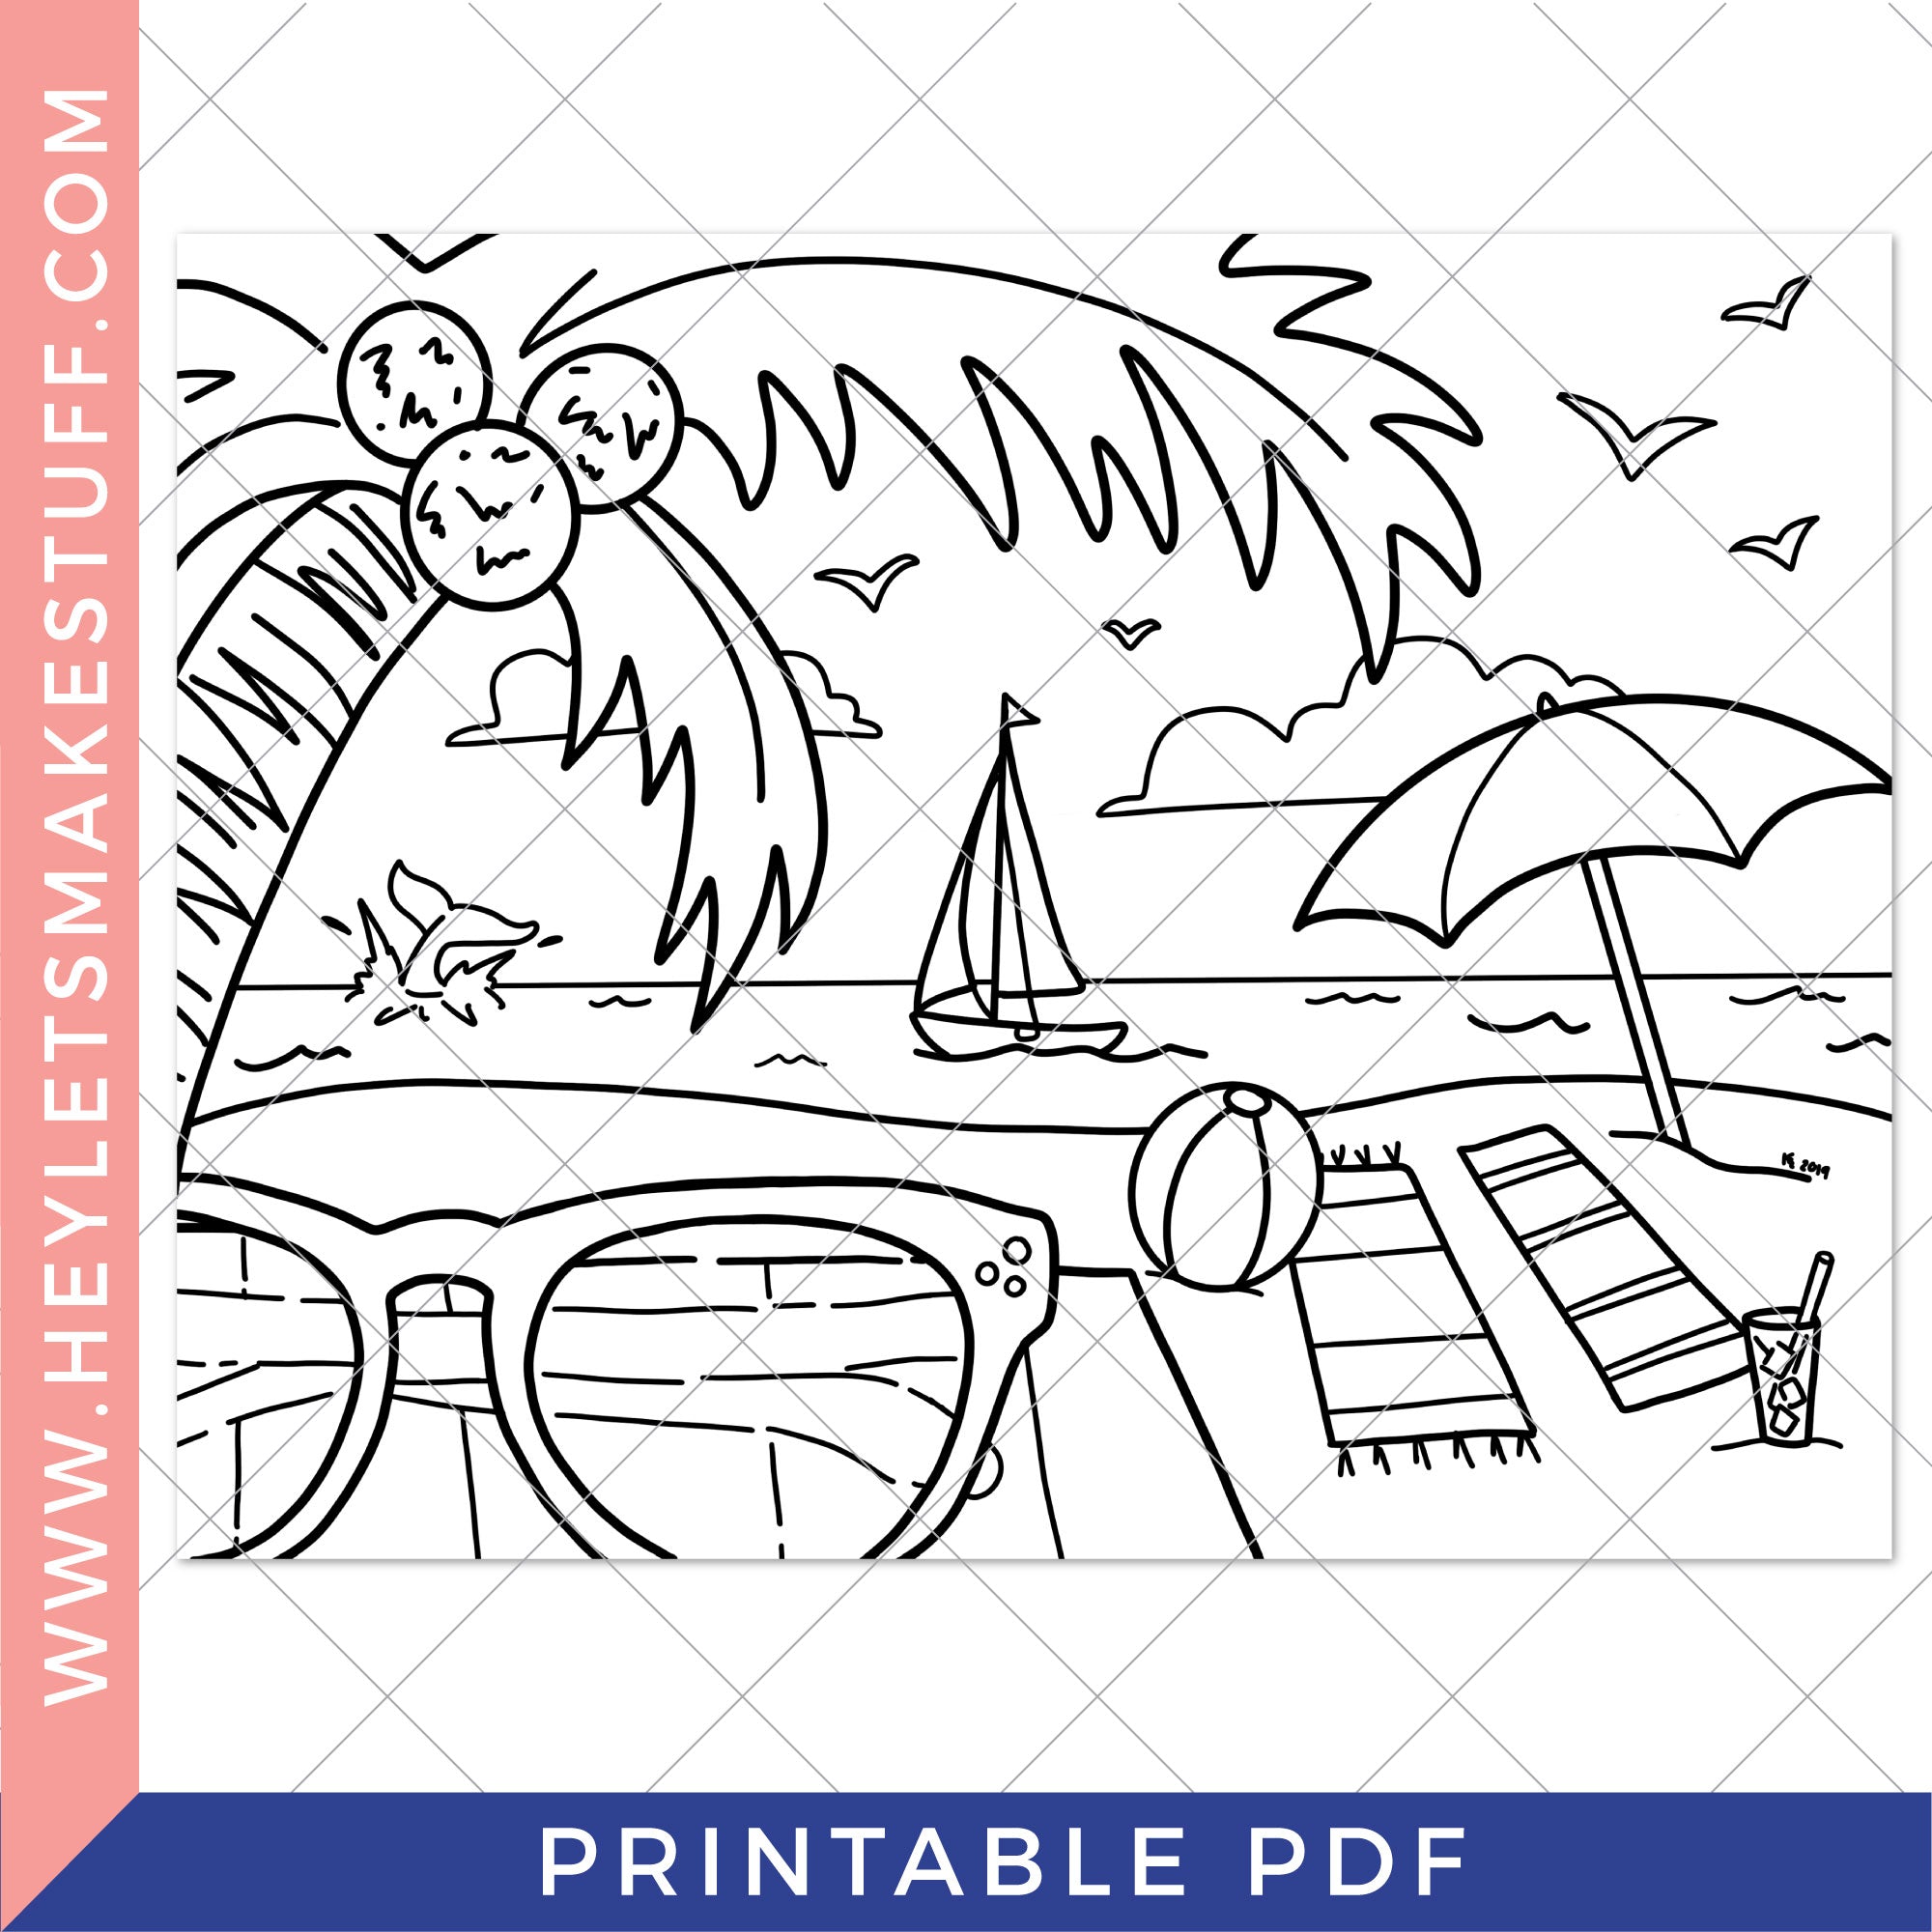 Printable summer coloring page â hey lets make stuff